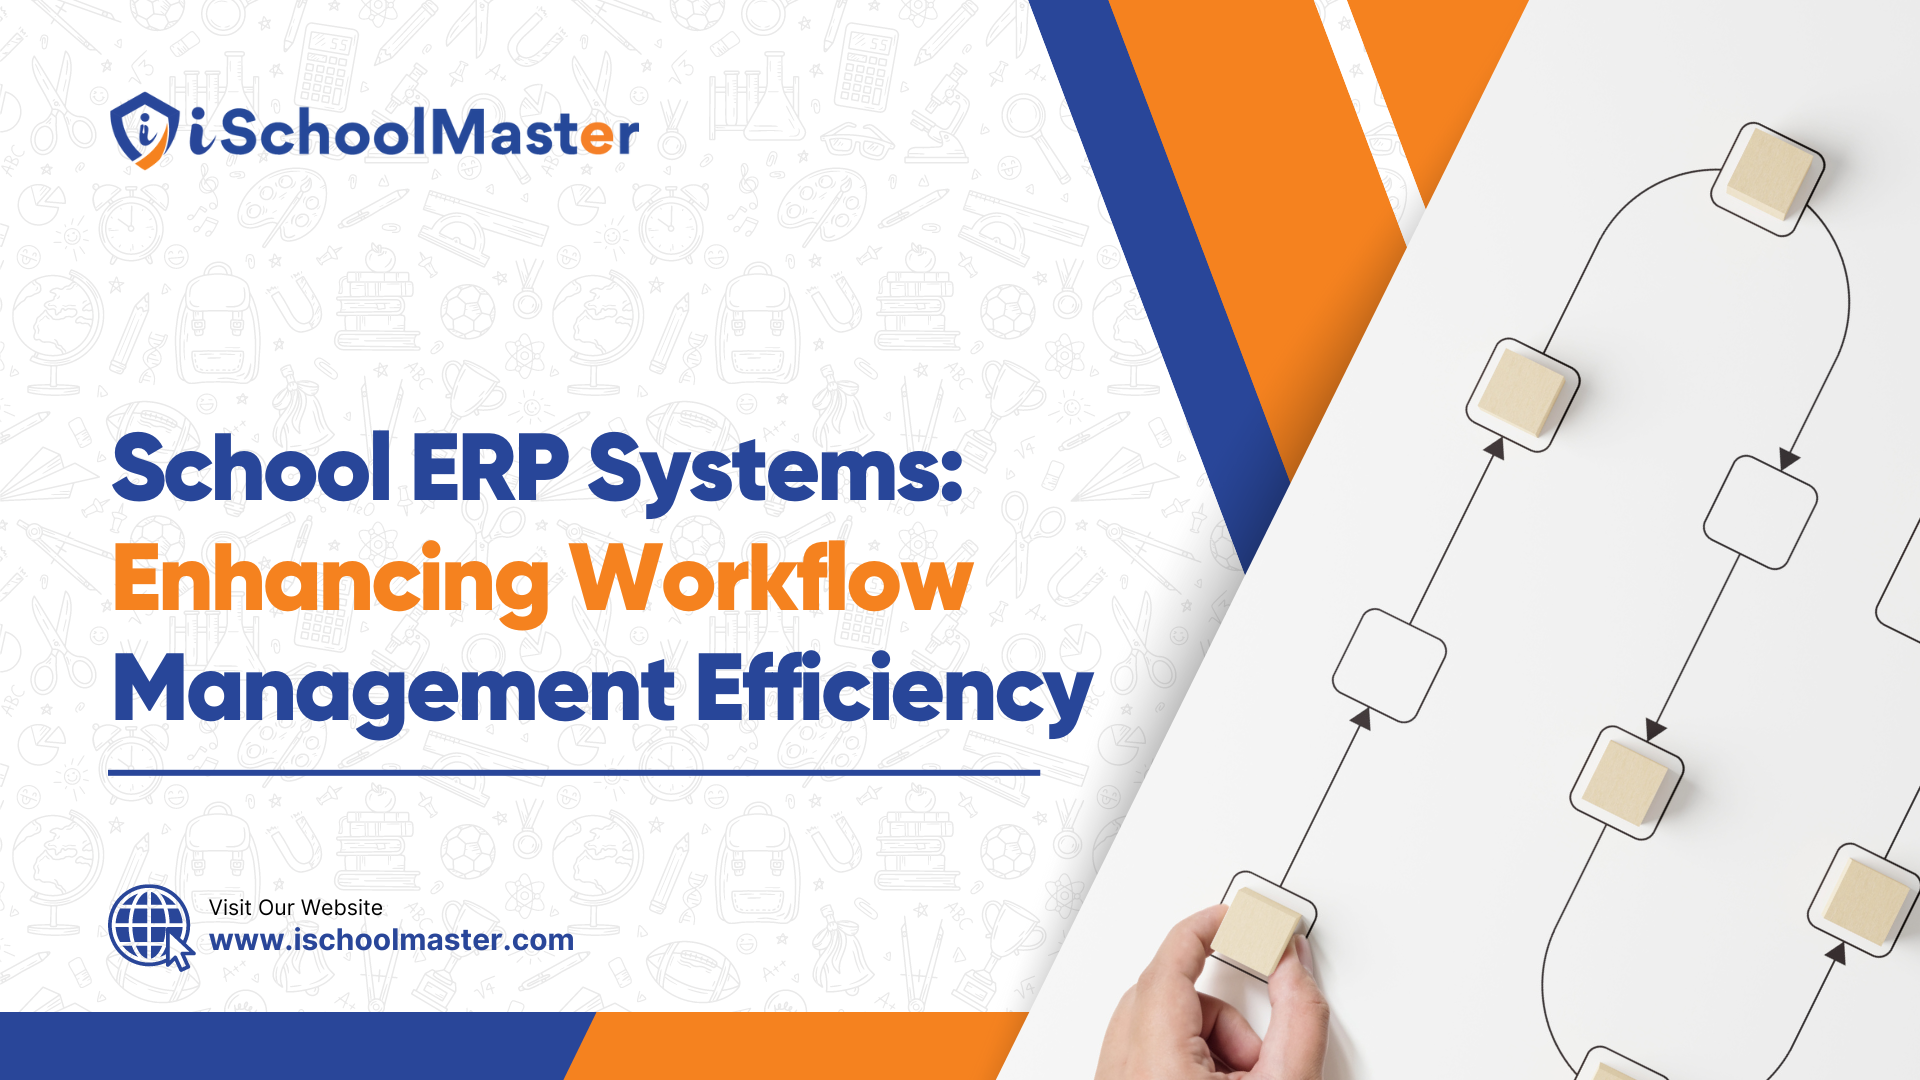 School ERP Systems: Enhancing Workflow Management Efficiency